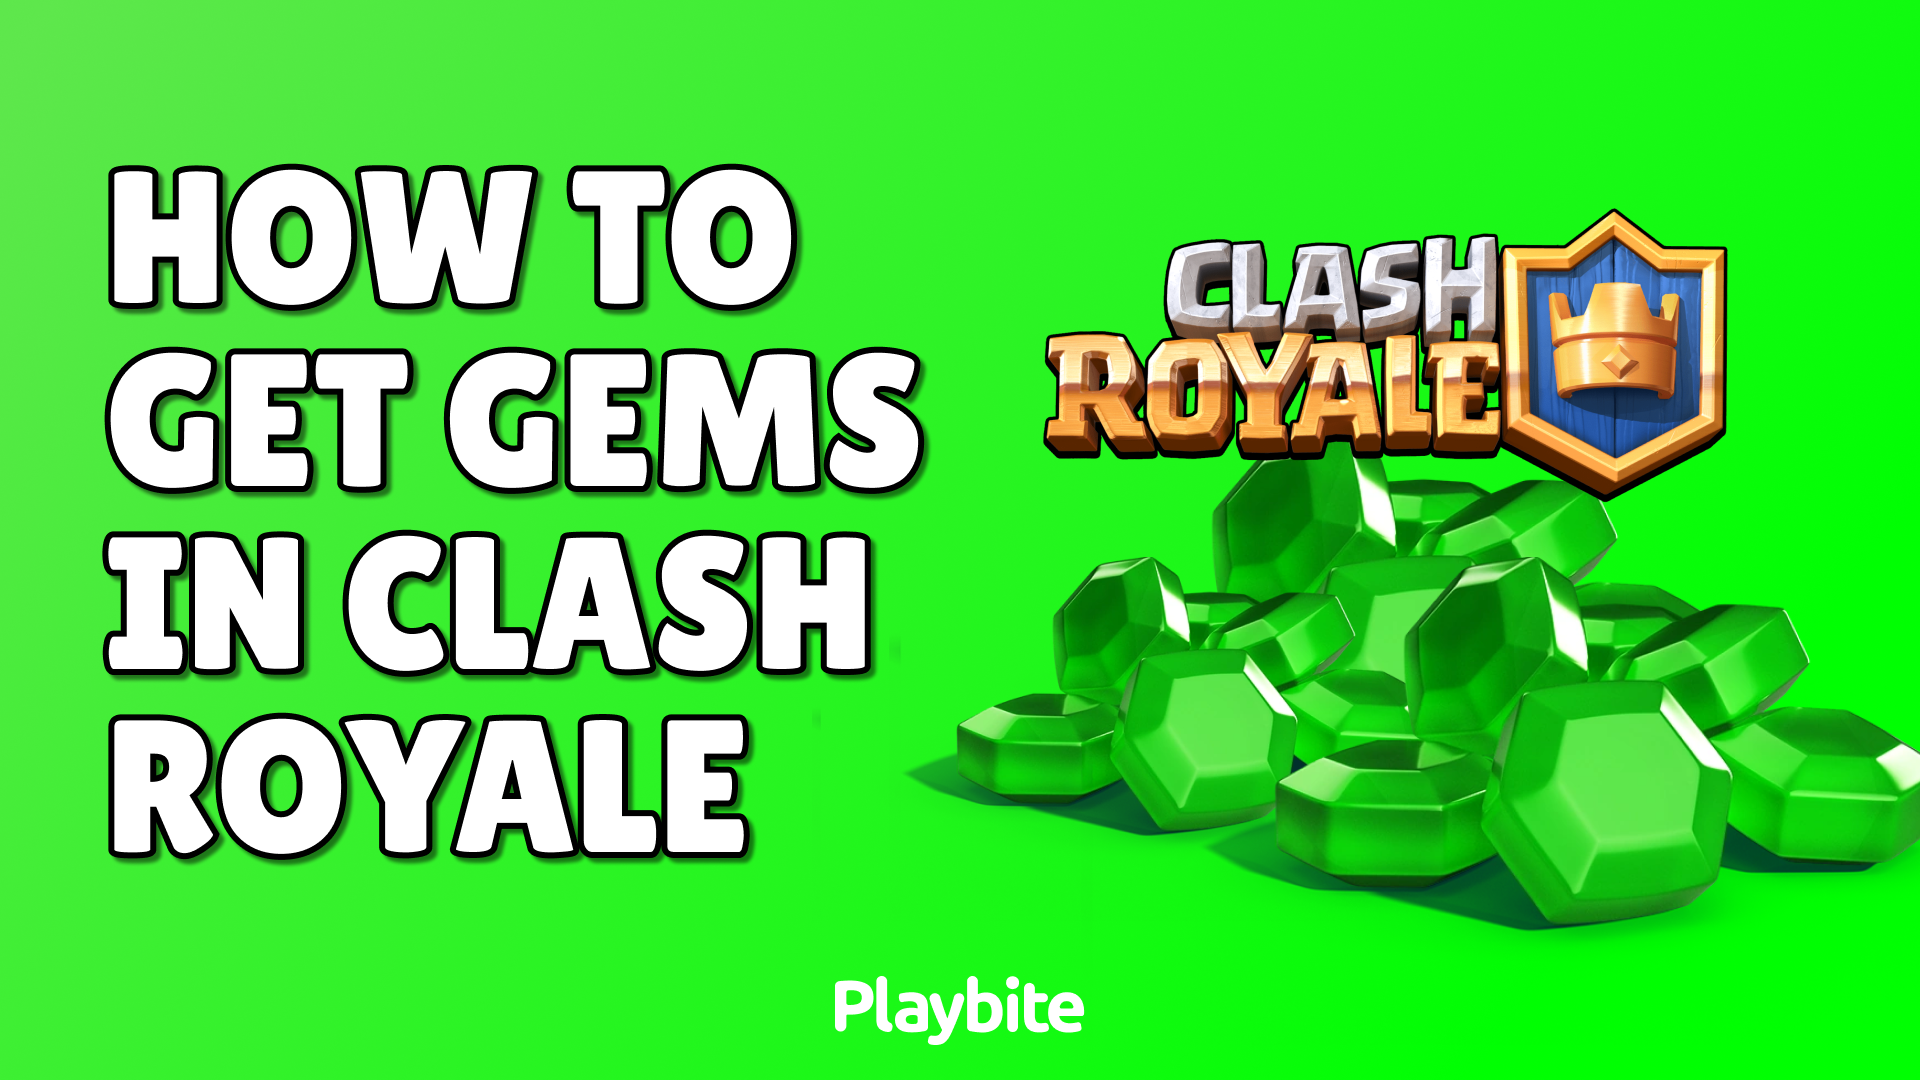 How To Get Gems In Clash Royale